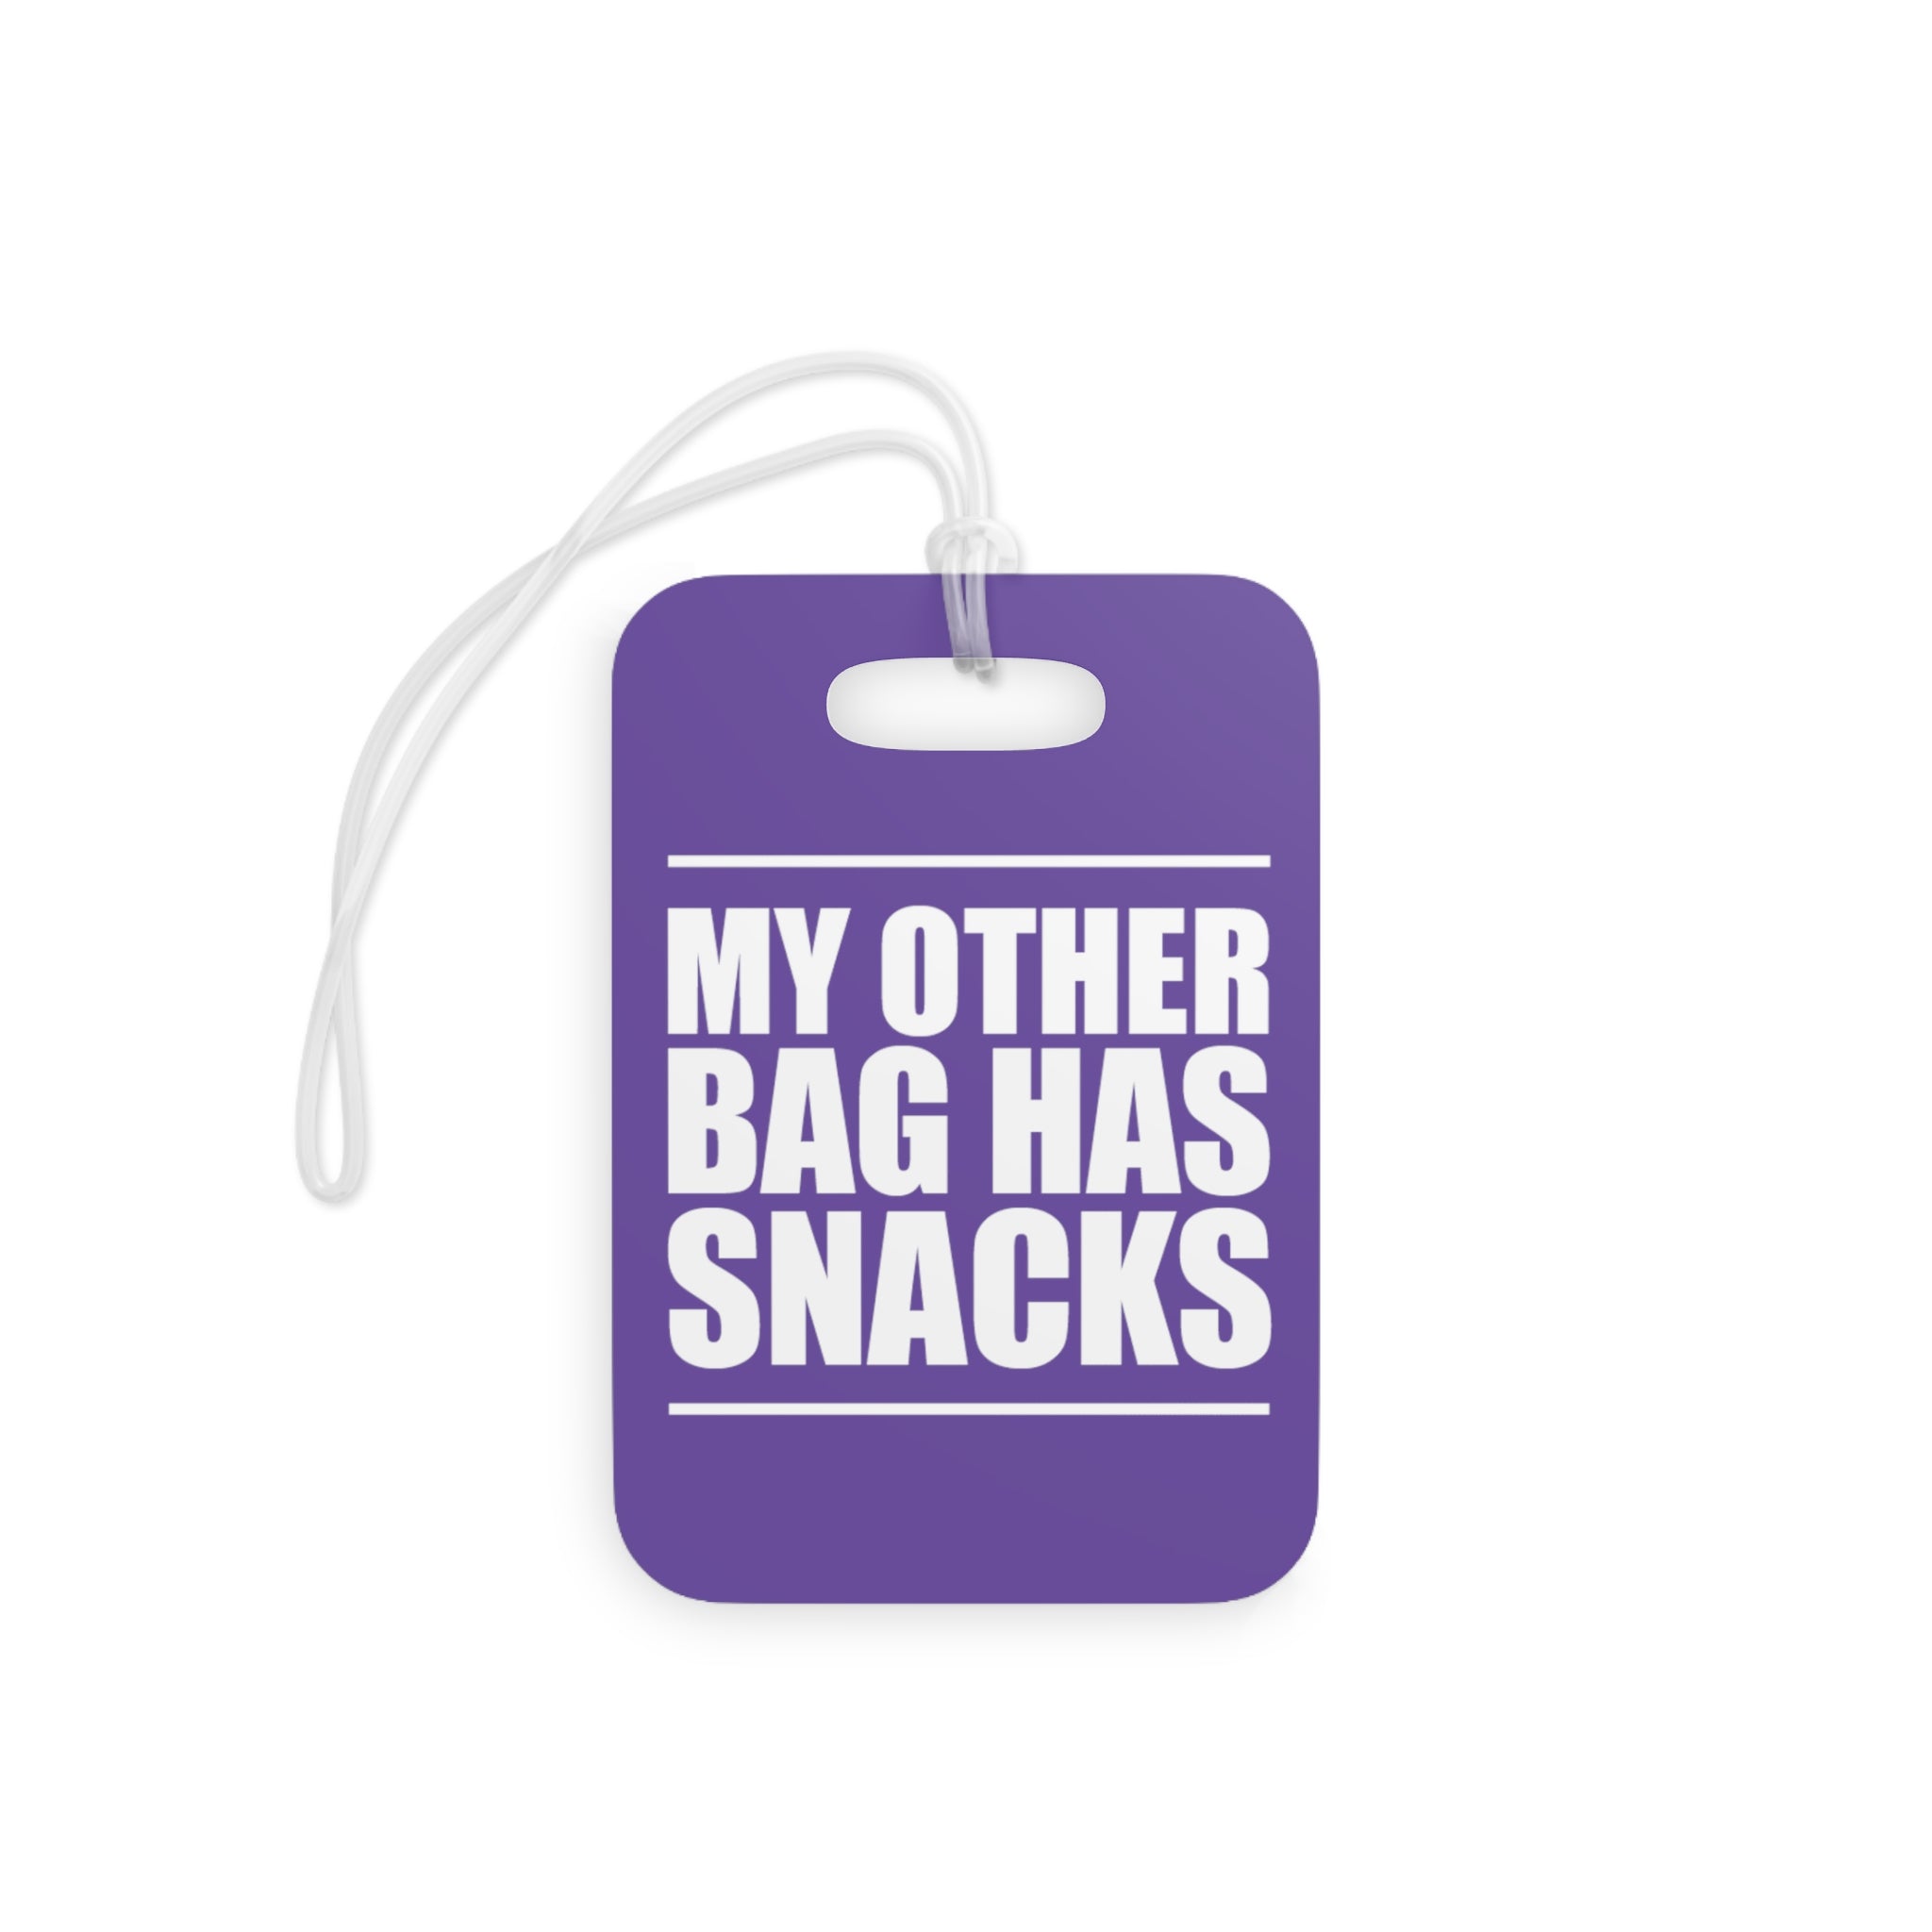 My other bag has snacks Luggage Tag (Purple)